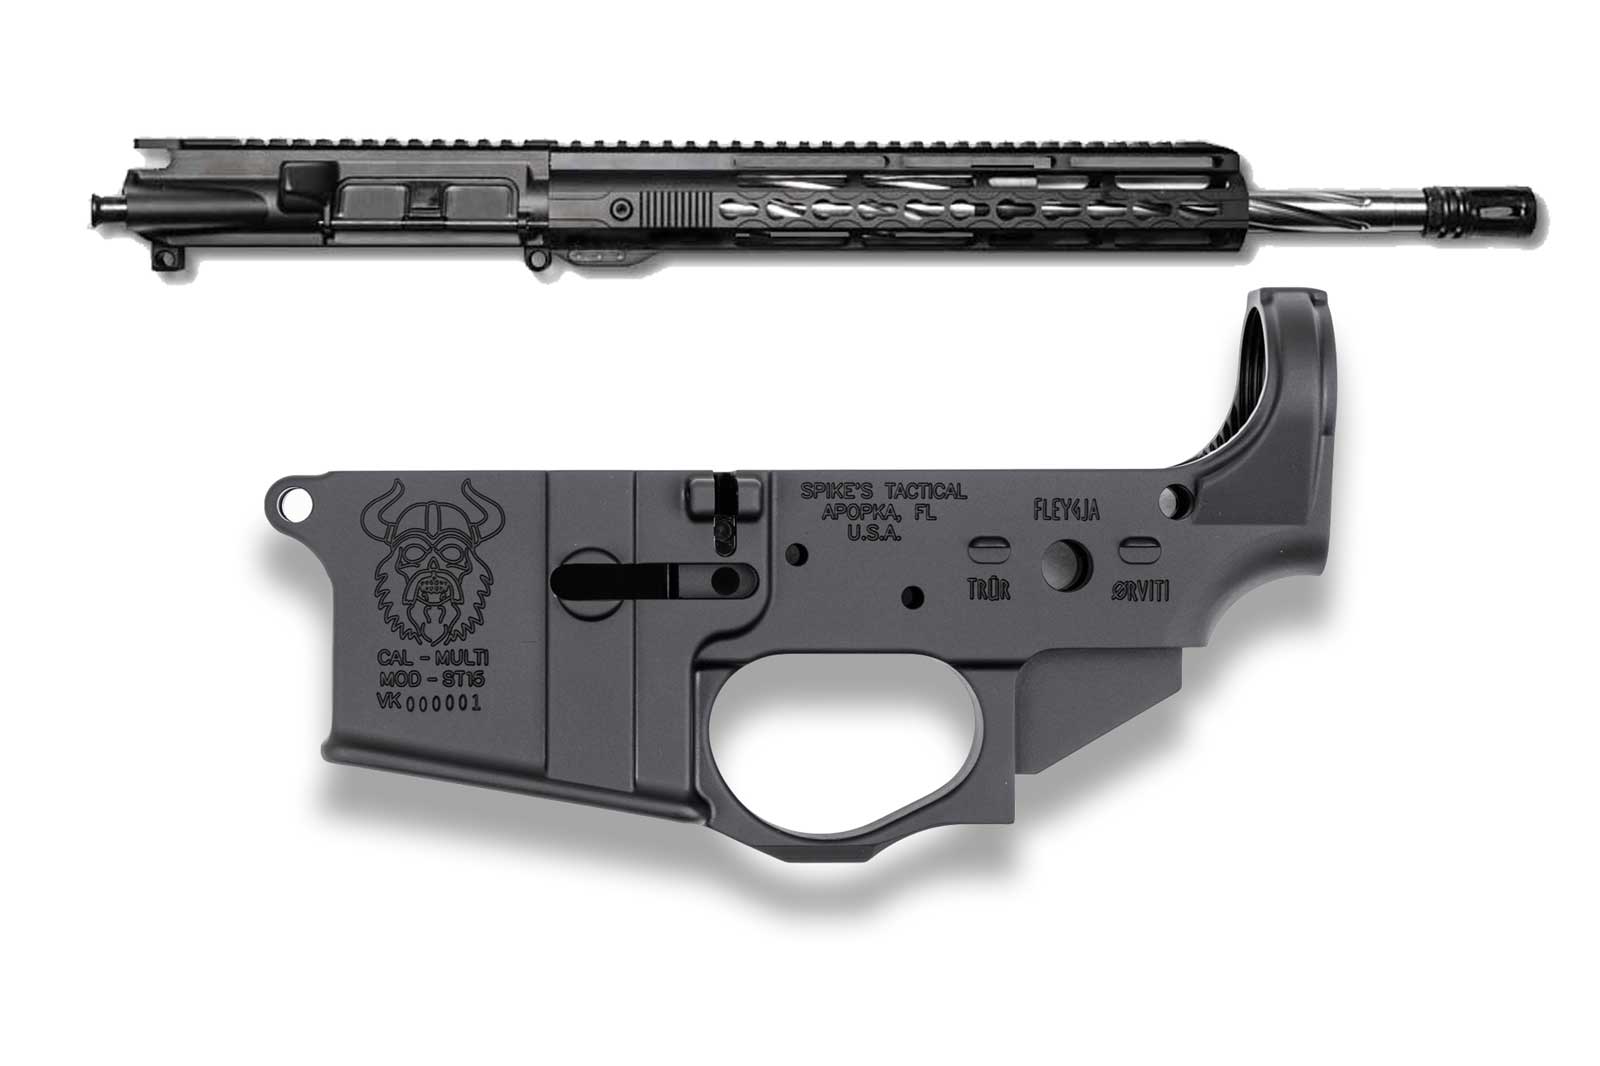 This AR15 upper assembly features a 16" .223 WYLDE spiral flute ba...